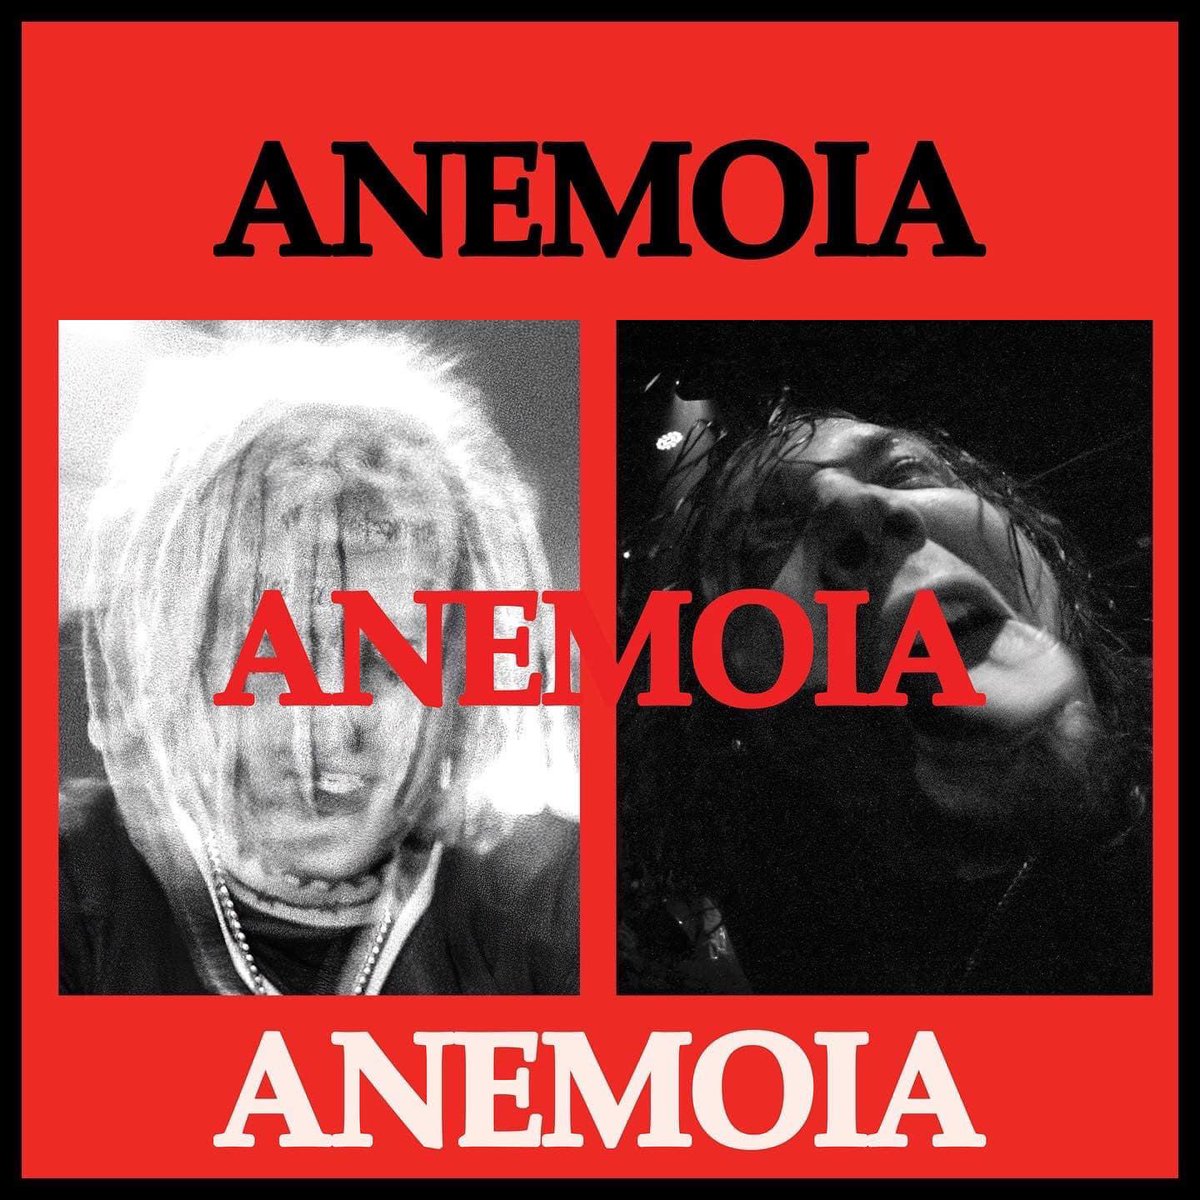 ⛔️ANEMOIA⛔️ You’ve been apart of the experiment all along but we’re happy to wake you 🌙 New prescription from @ouijv & @DarbyOTrill out now💊 New cuts on the track “The Trees Have Eyes” FT The Duke Violent J @Devereauxxxx & @LazyCrazyShaggy all over the beats WHOOP WHOOP